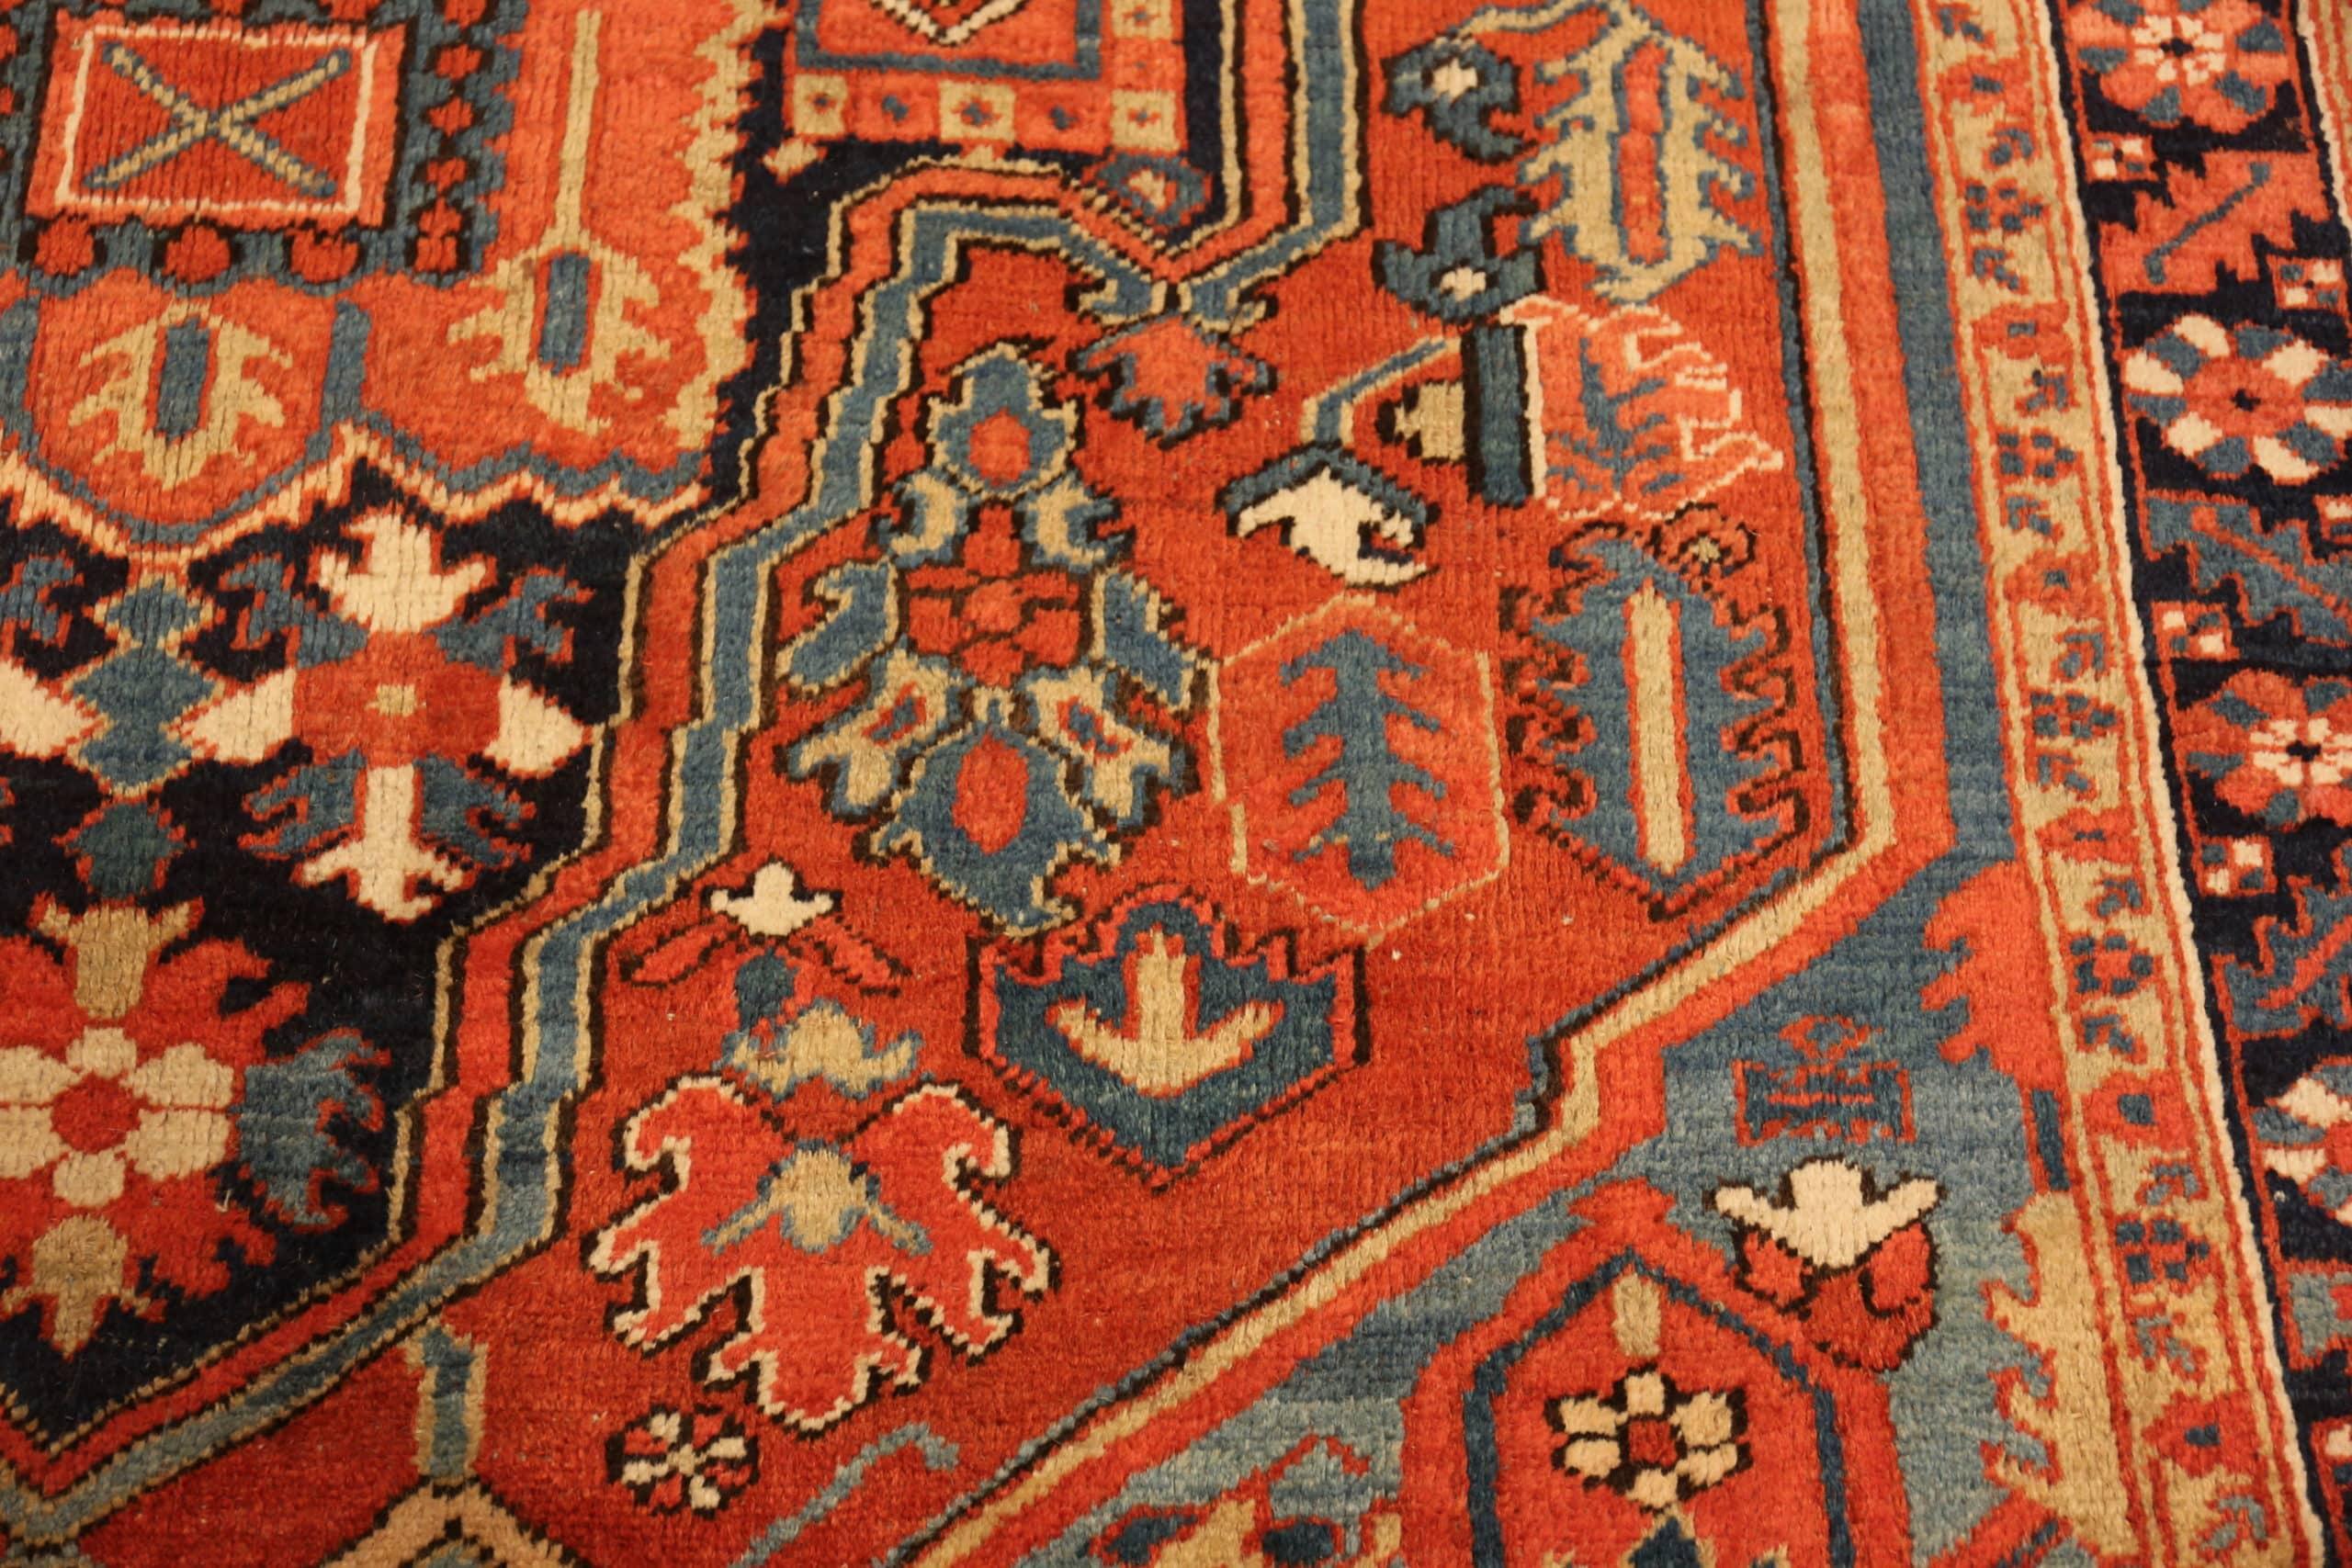 20th Century Small Antique Persian Heriz Rug. Size: 6 ft 5 in x 8 ft